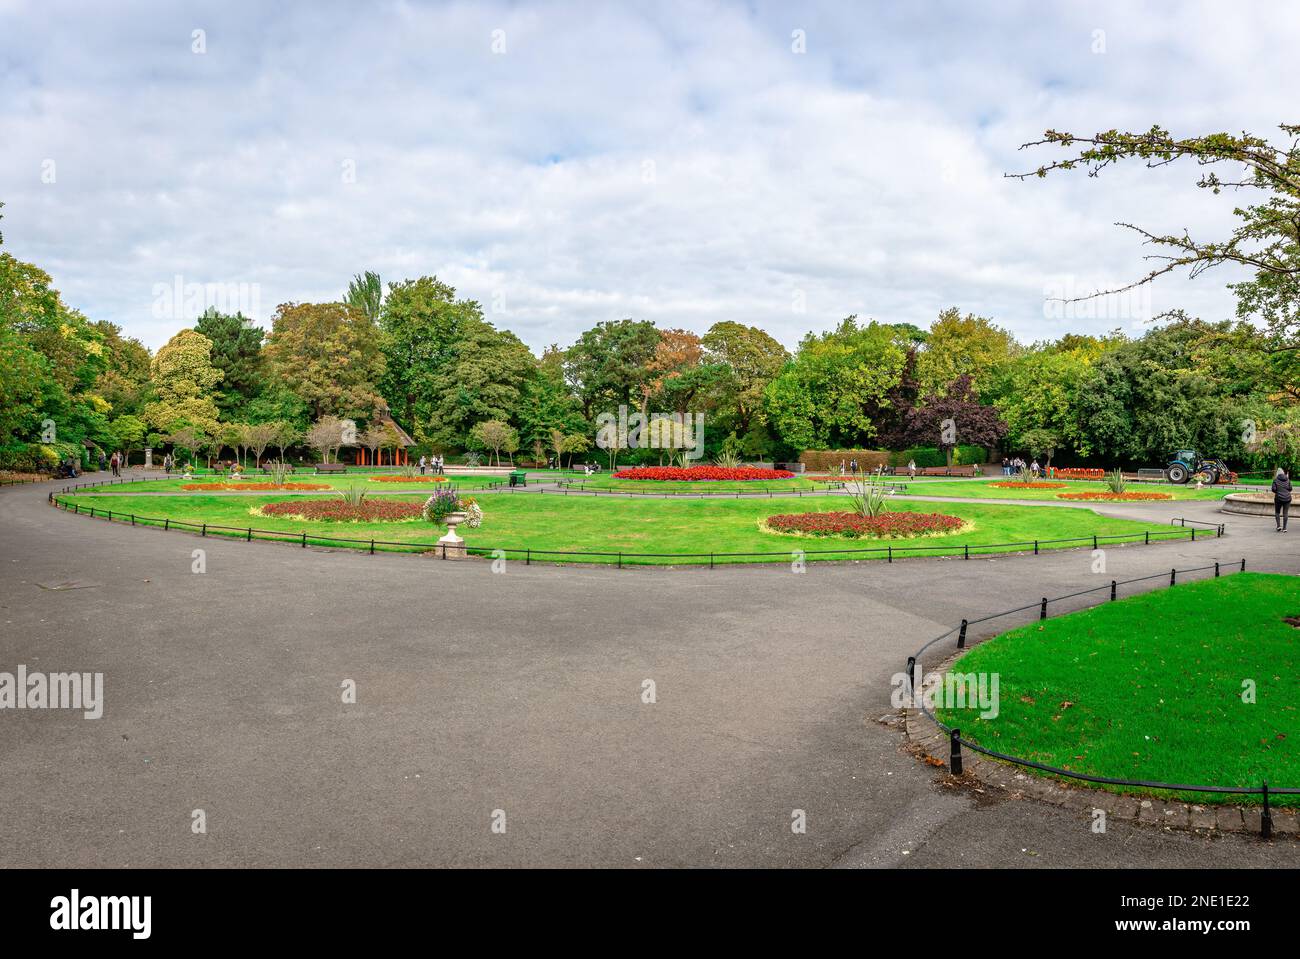 Dublin, Ireland - September 16 2022: View of St Stephen's Green, a public park located in the centre of the city. Stock Photo